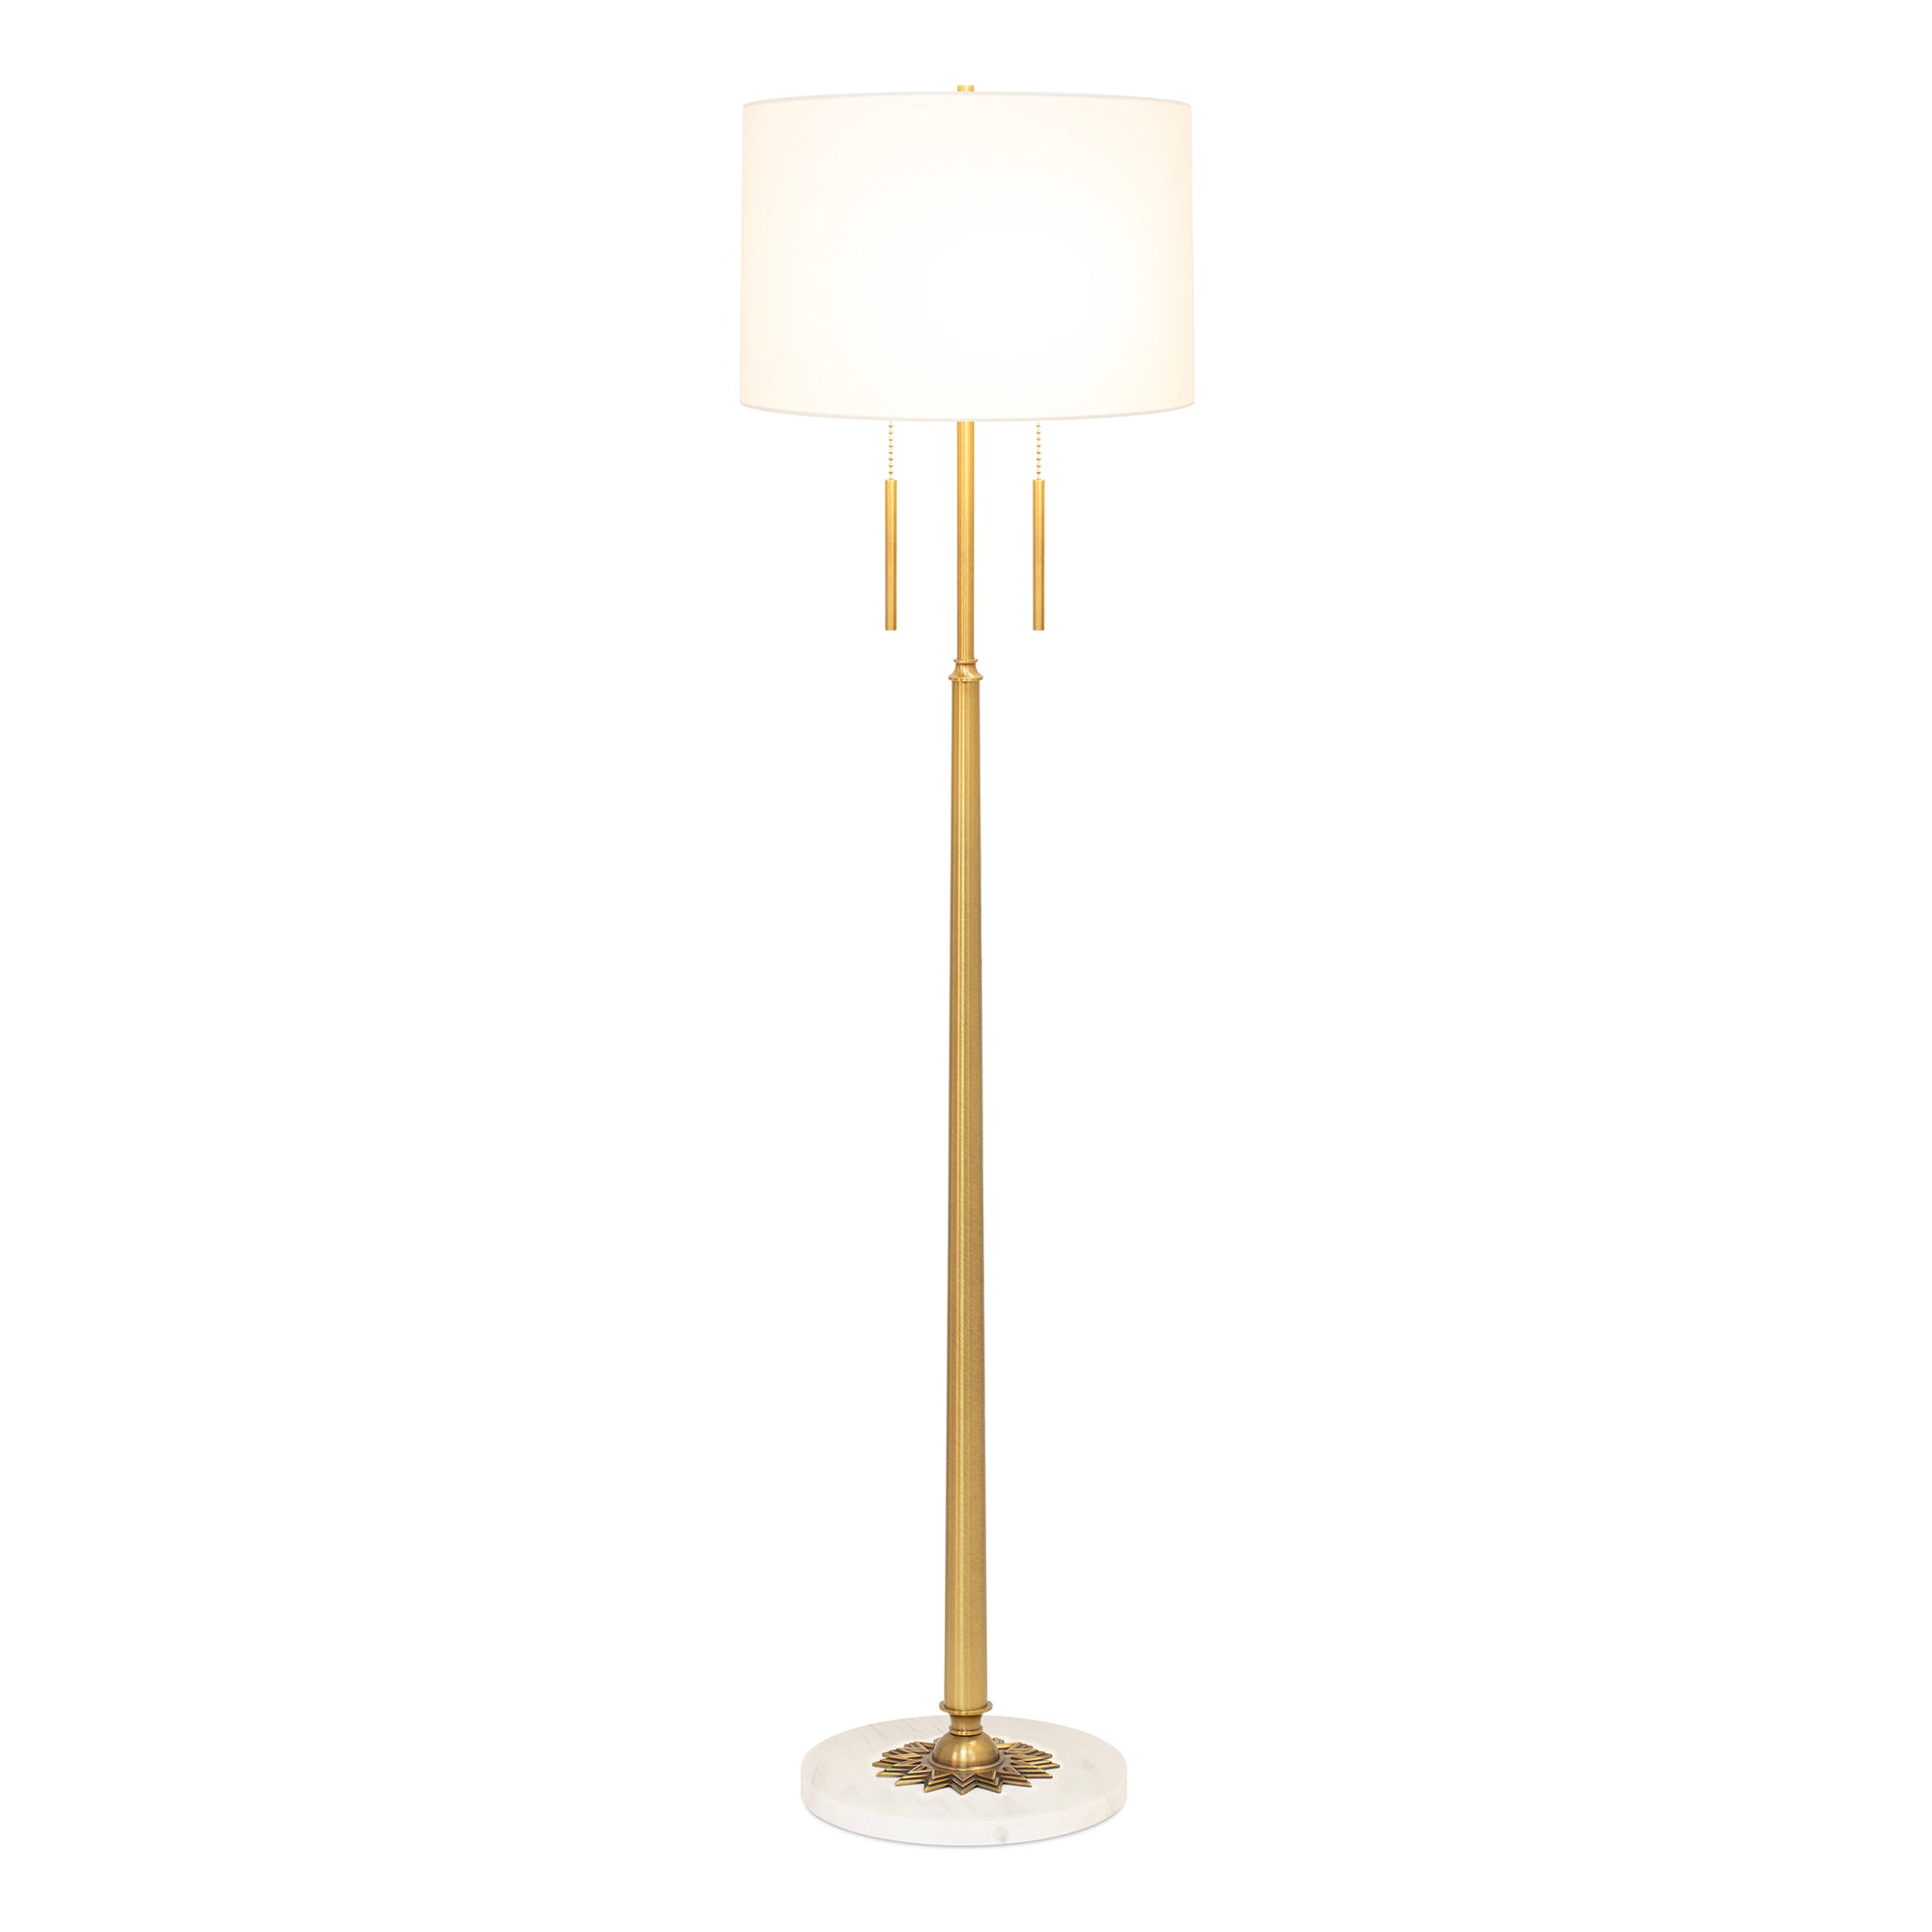 Star Floor Lamp with Shade - Couture Lamps